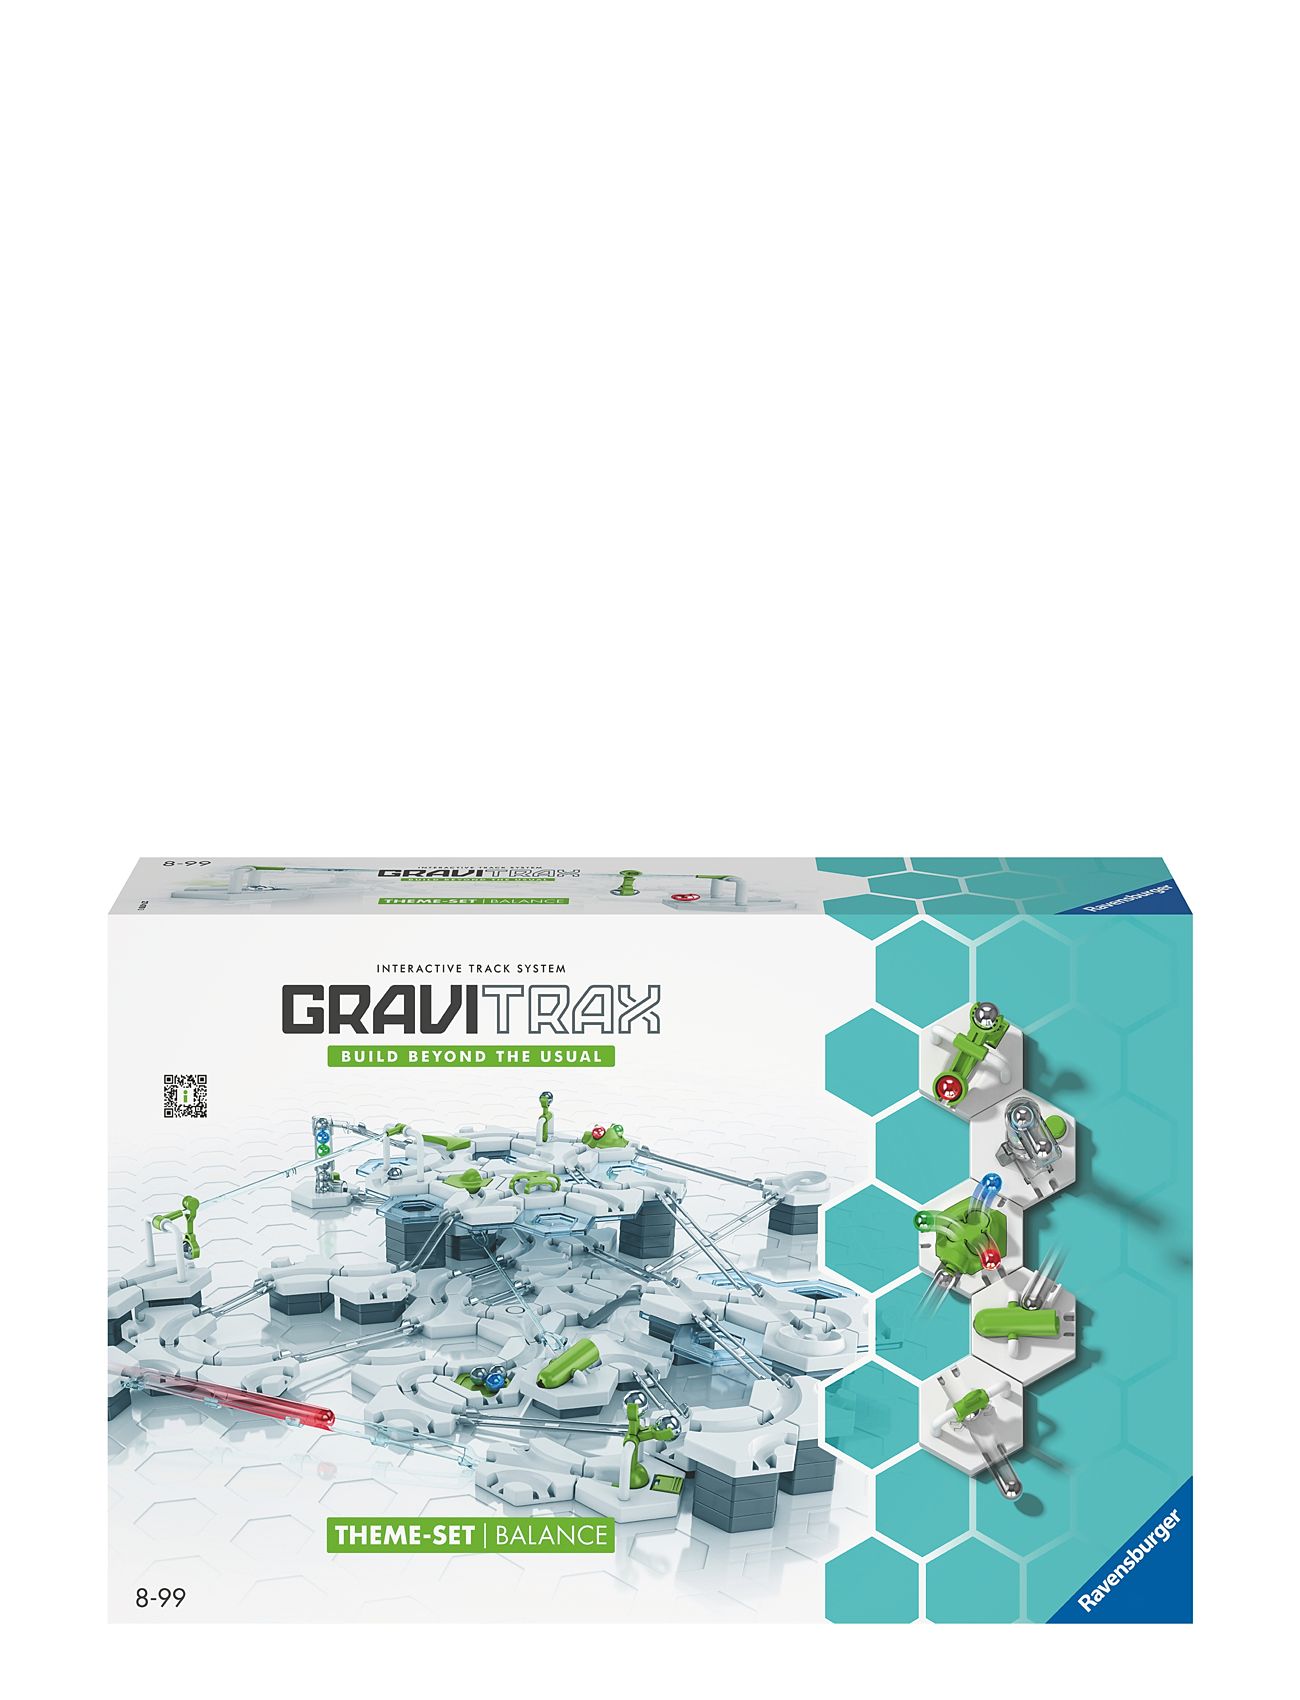 Gravitrax Starter-Set Balance Toys Puzzles And Games Games Board Games Multi/patterned Ravensburger